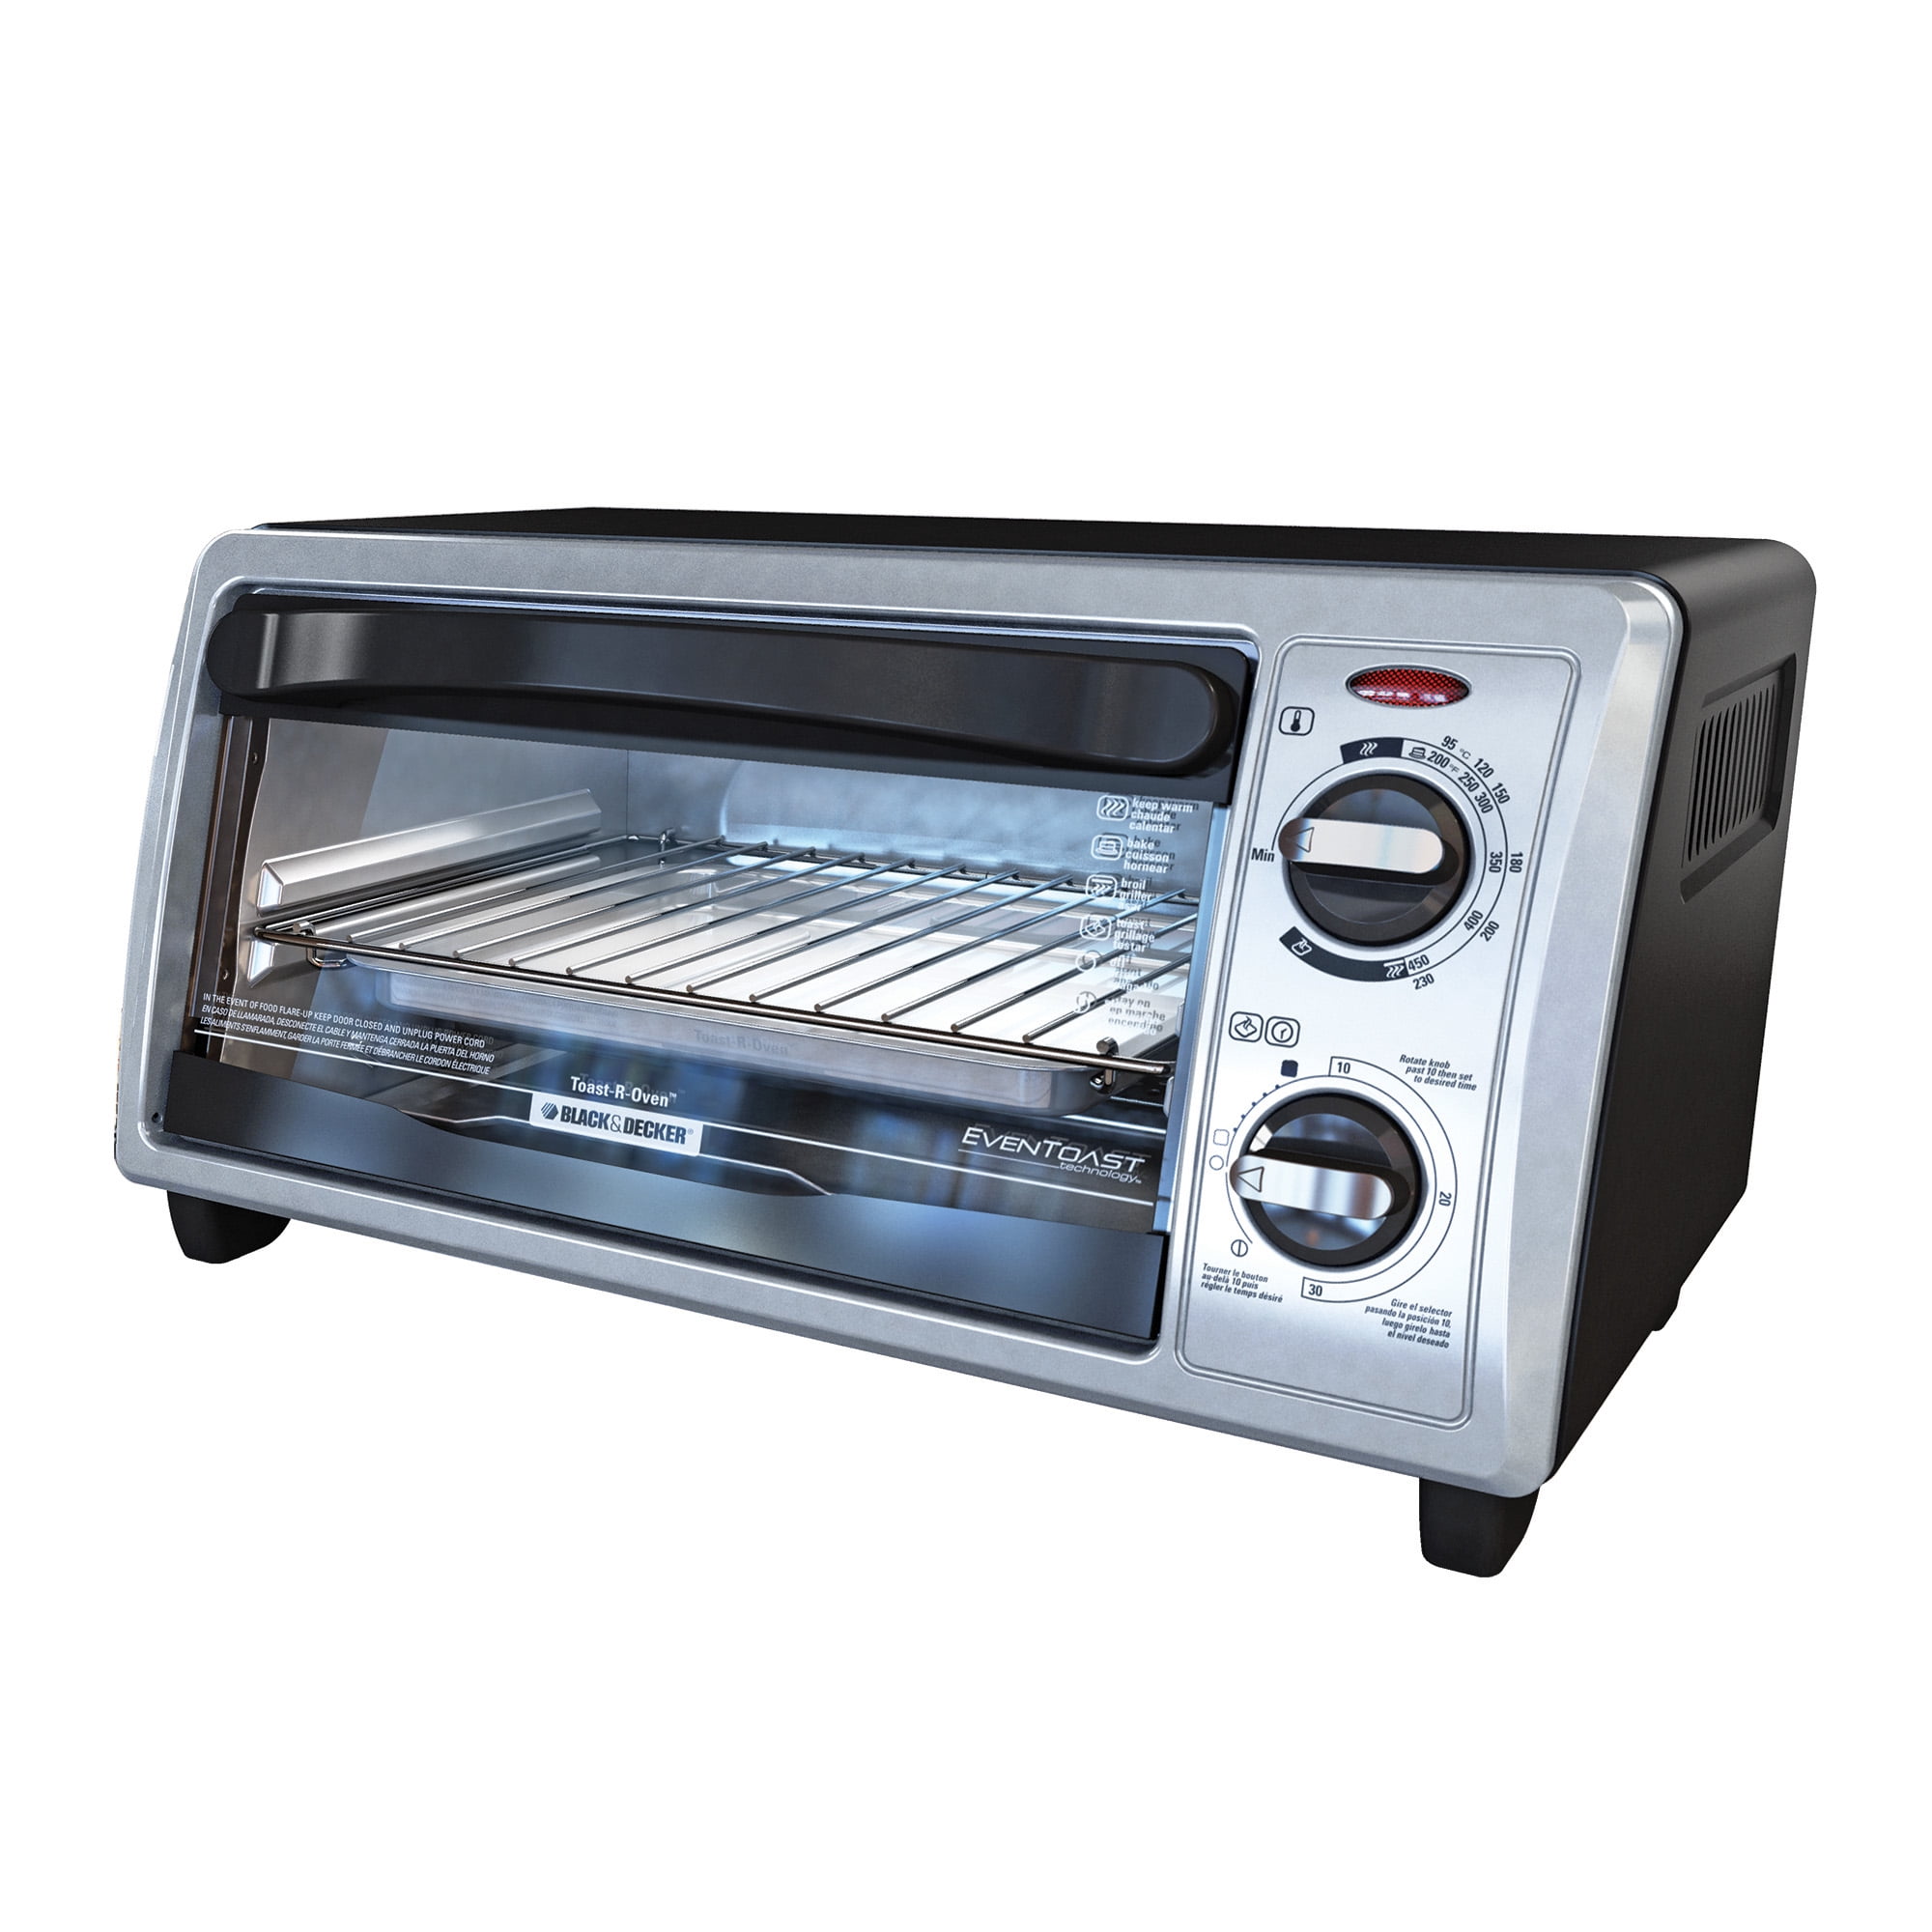 black-decker-4-slice-toaster-oven-even-toaster-t01332sbd-new